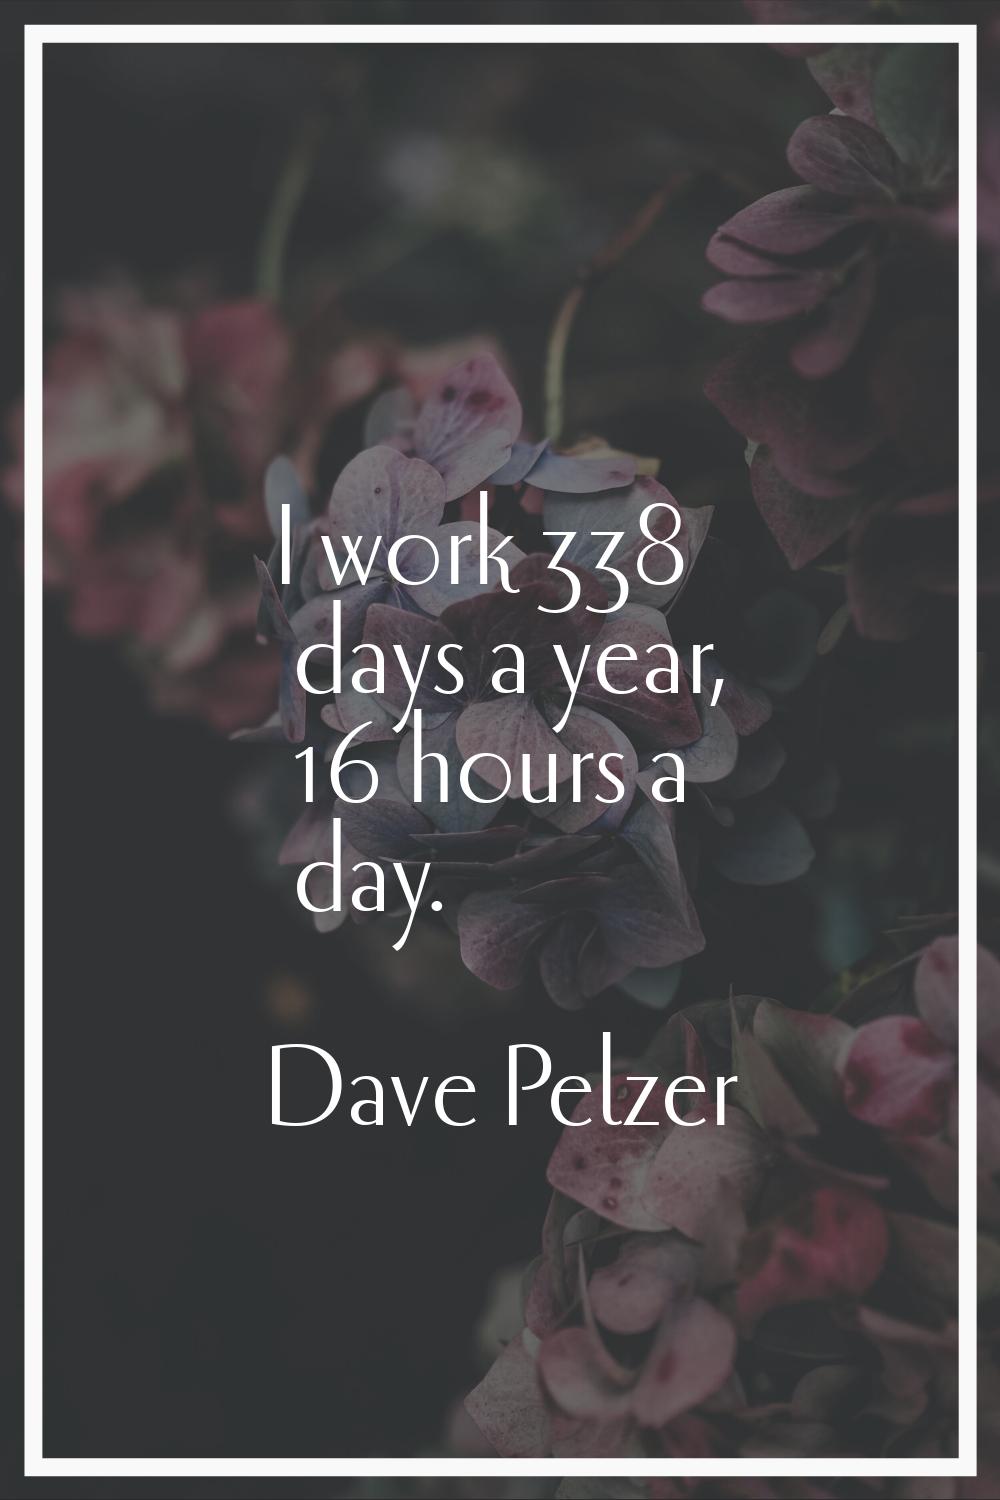 I work 338 days a year, 16 hours a day.